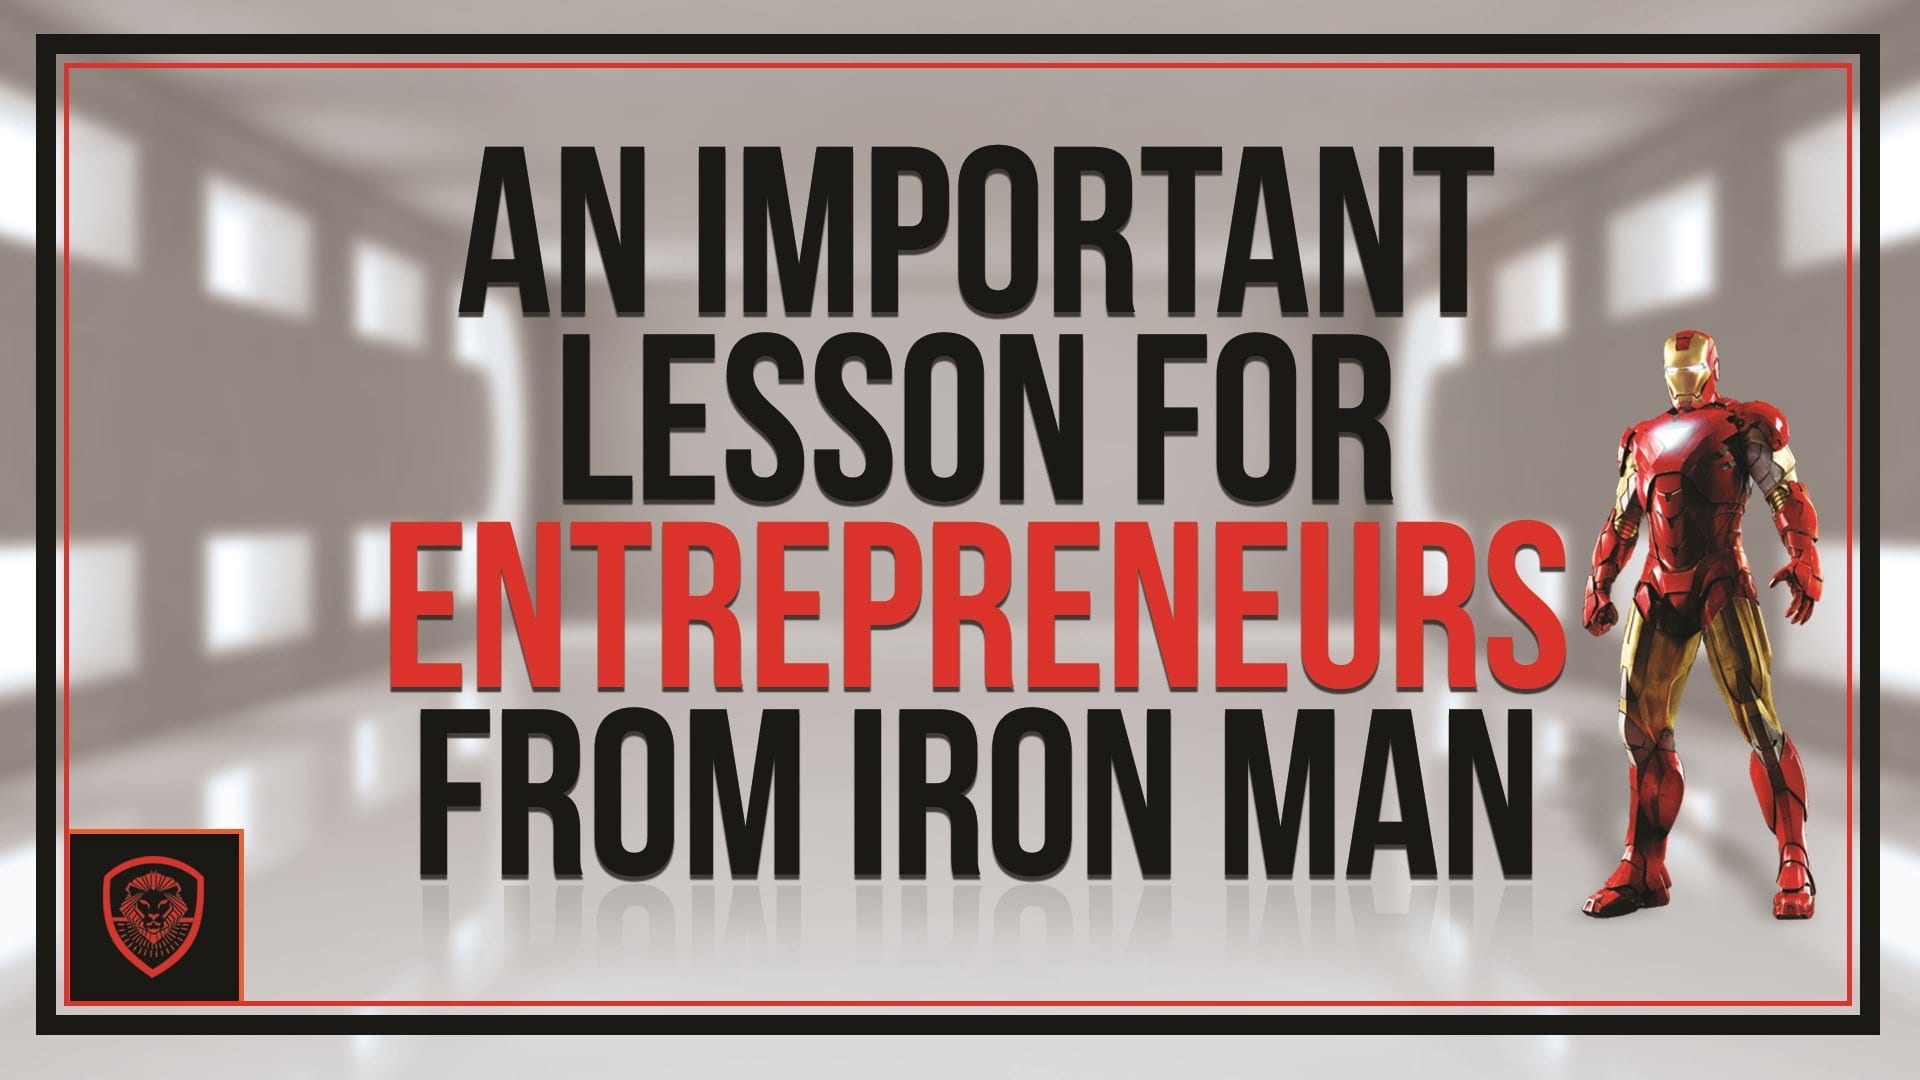 An Important Lesson for Entrepreneurs from Iron Man